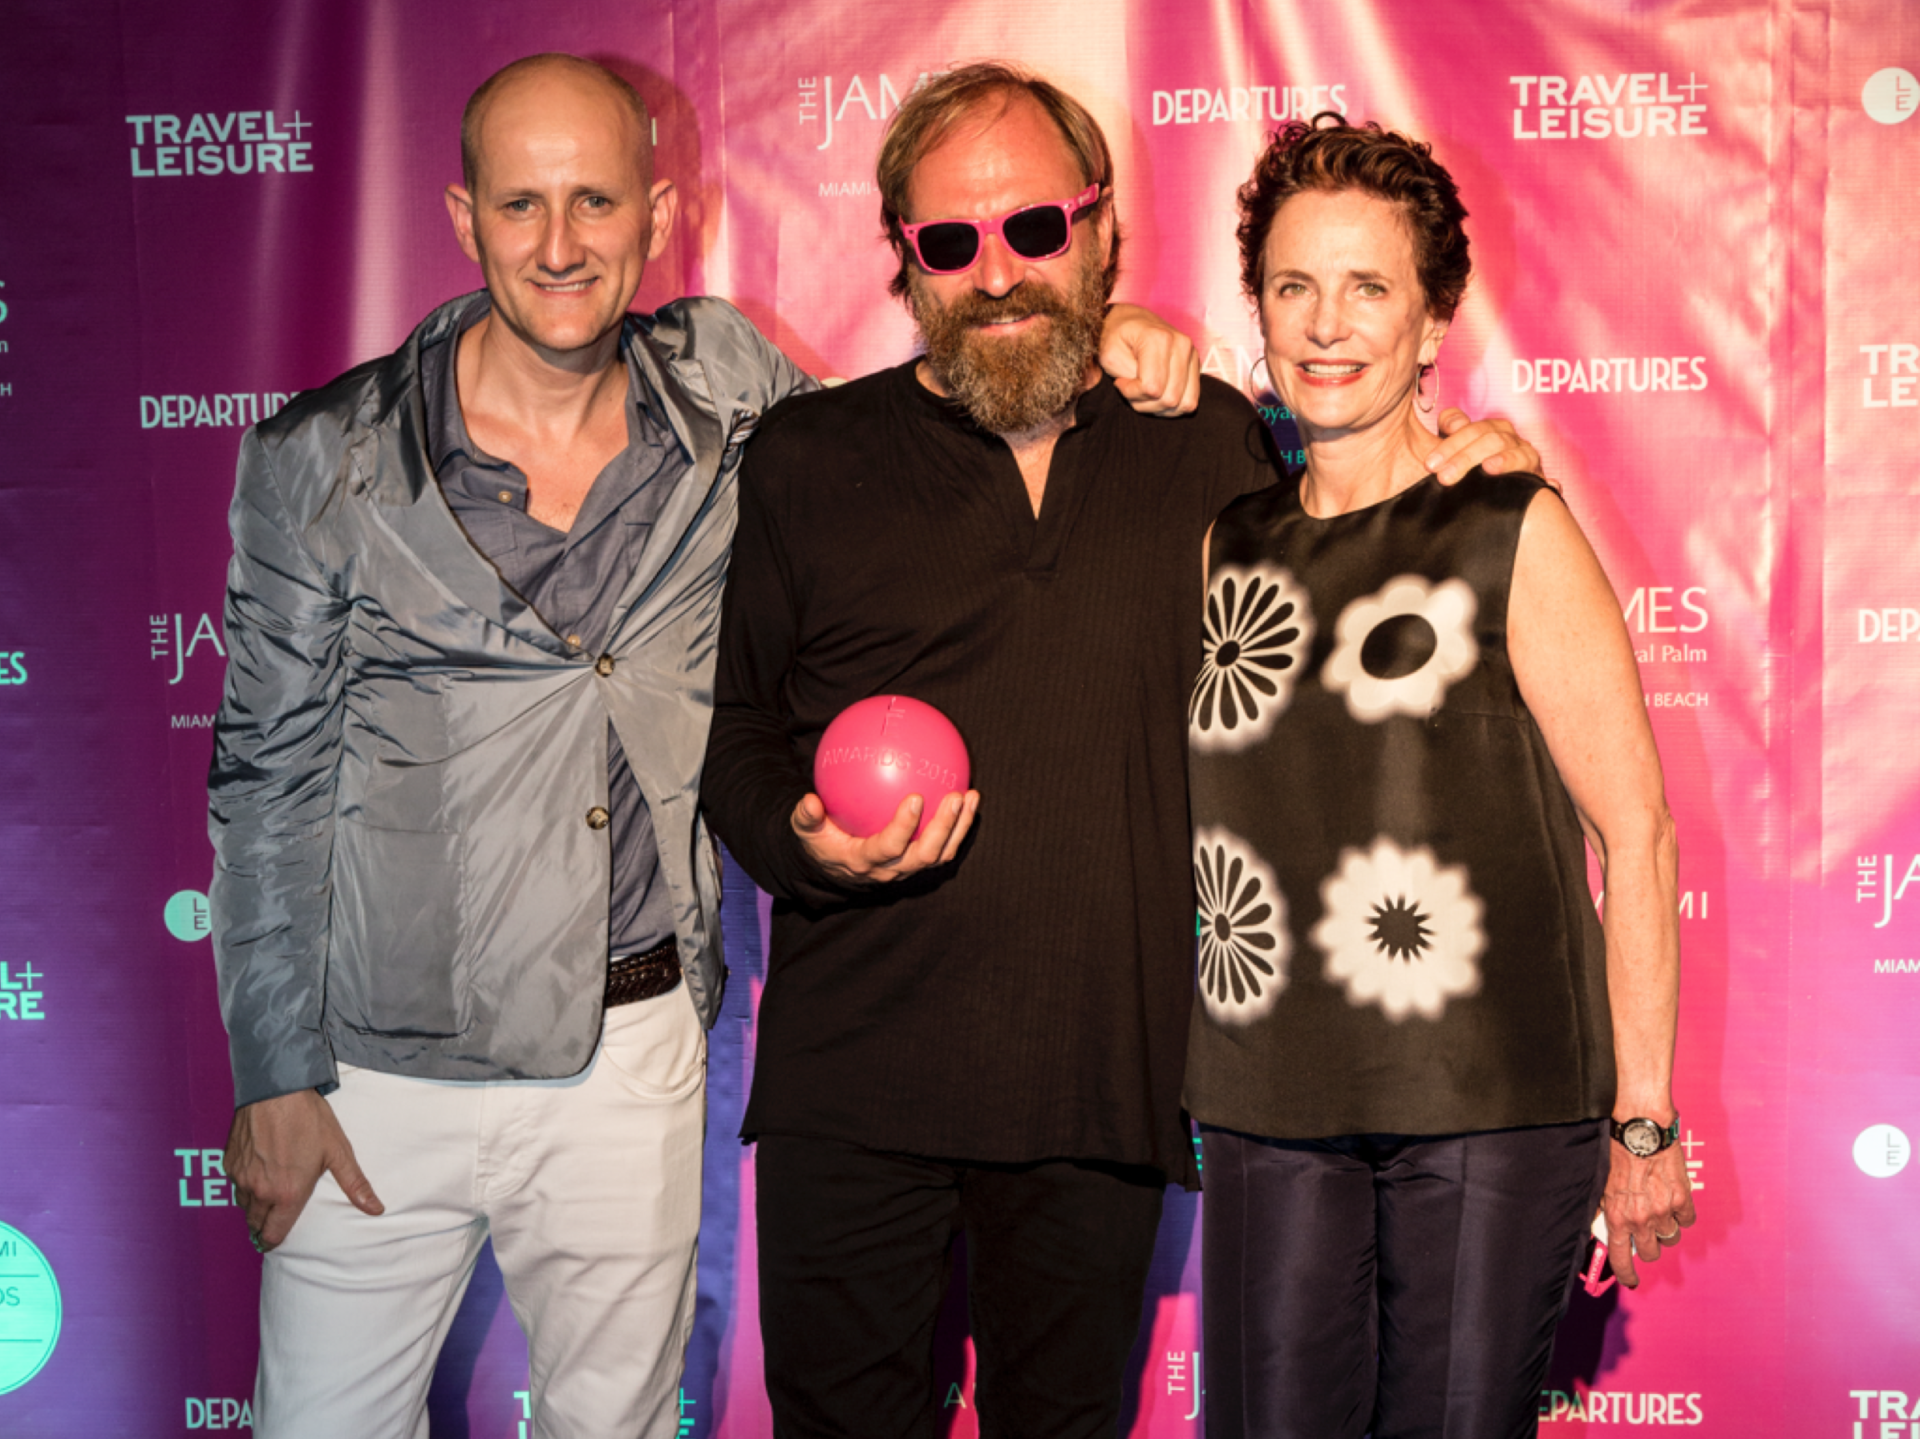 Claus Sendlinger, CEO Design Hotels, receiving the award for Most Original Campaign at Limited Edition Miami (www.lemiami.com)